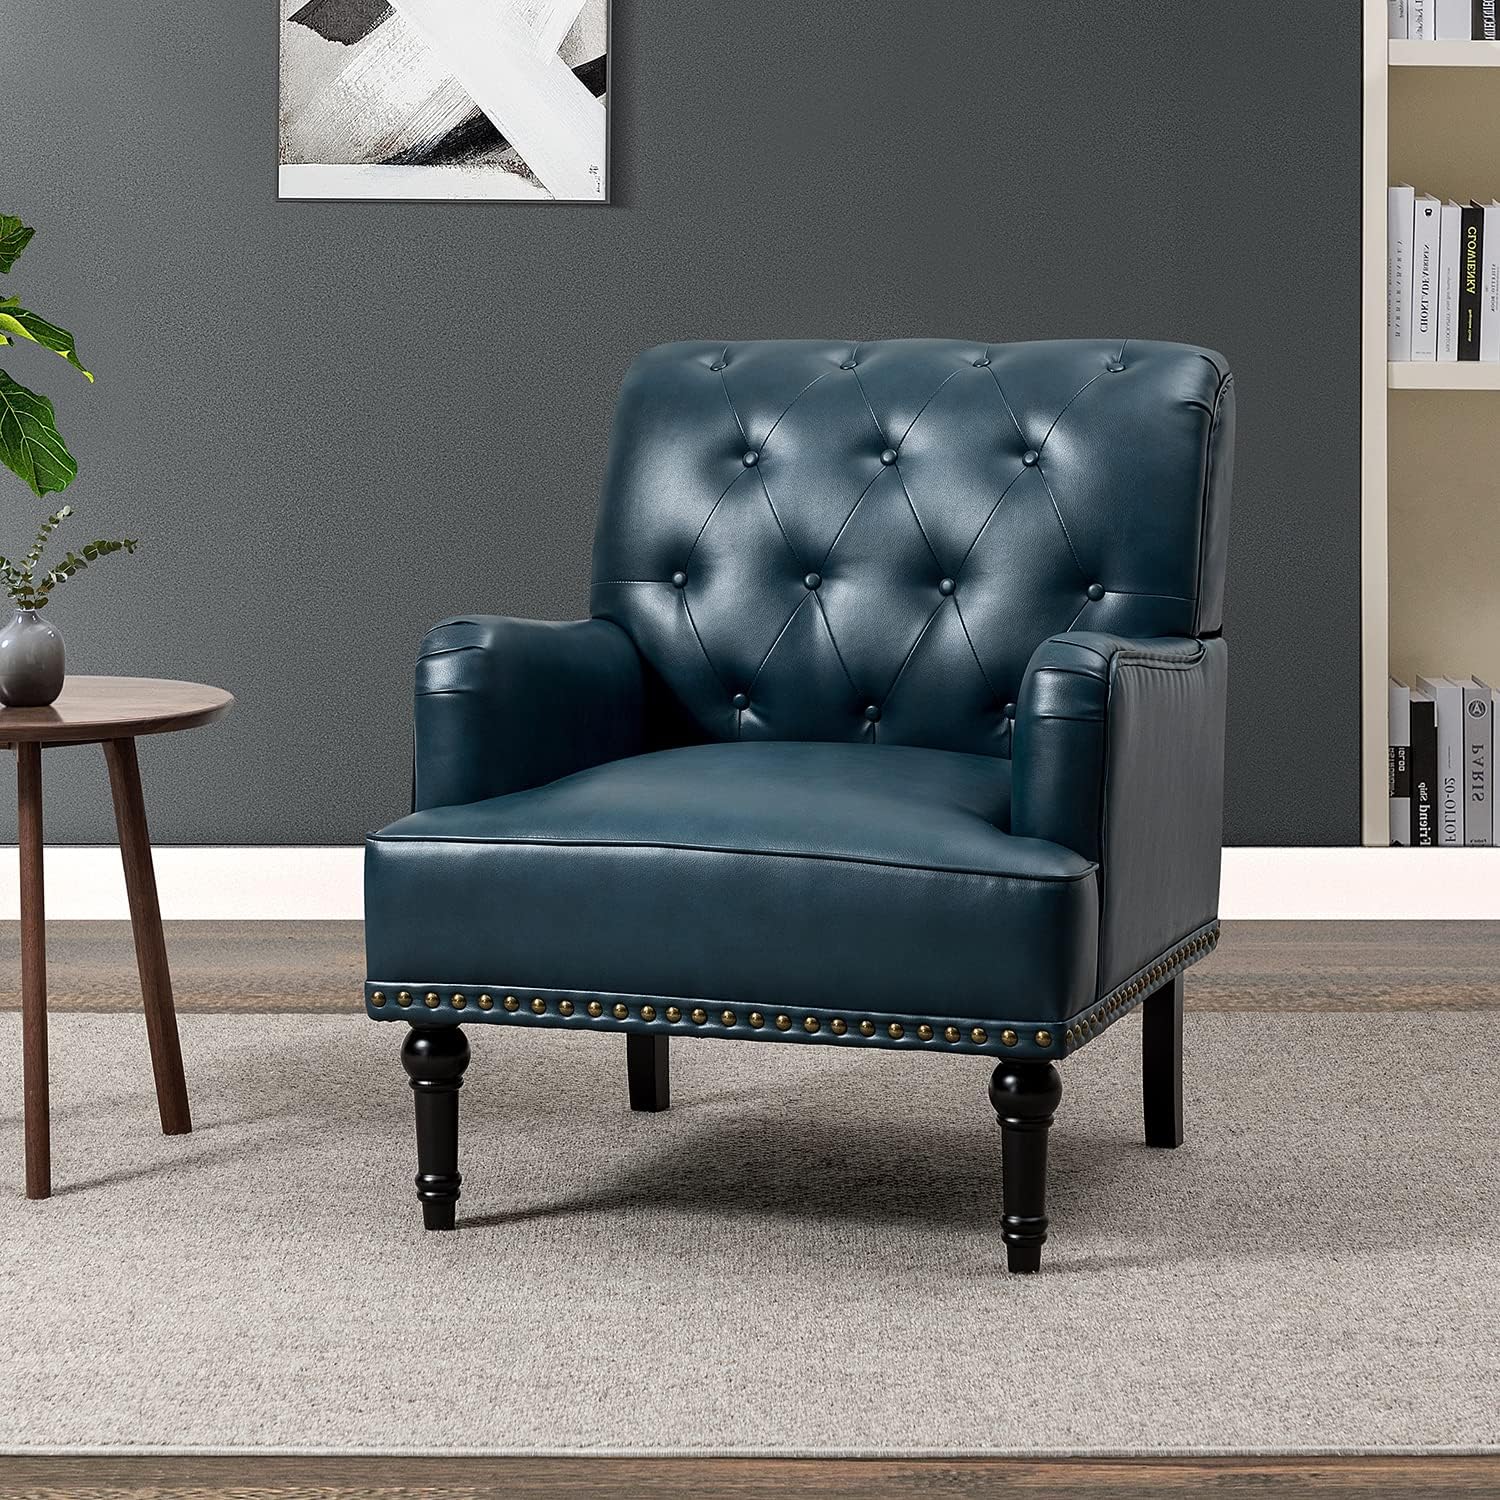 HULALA HOME Faux Leather Armchair